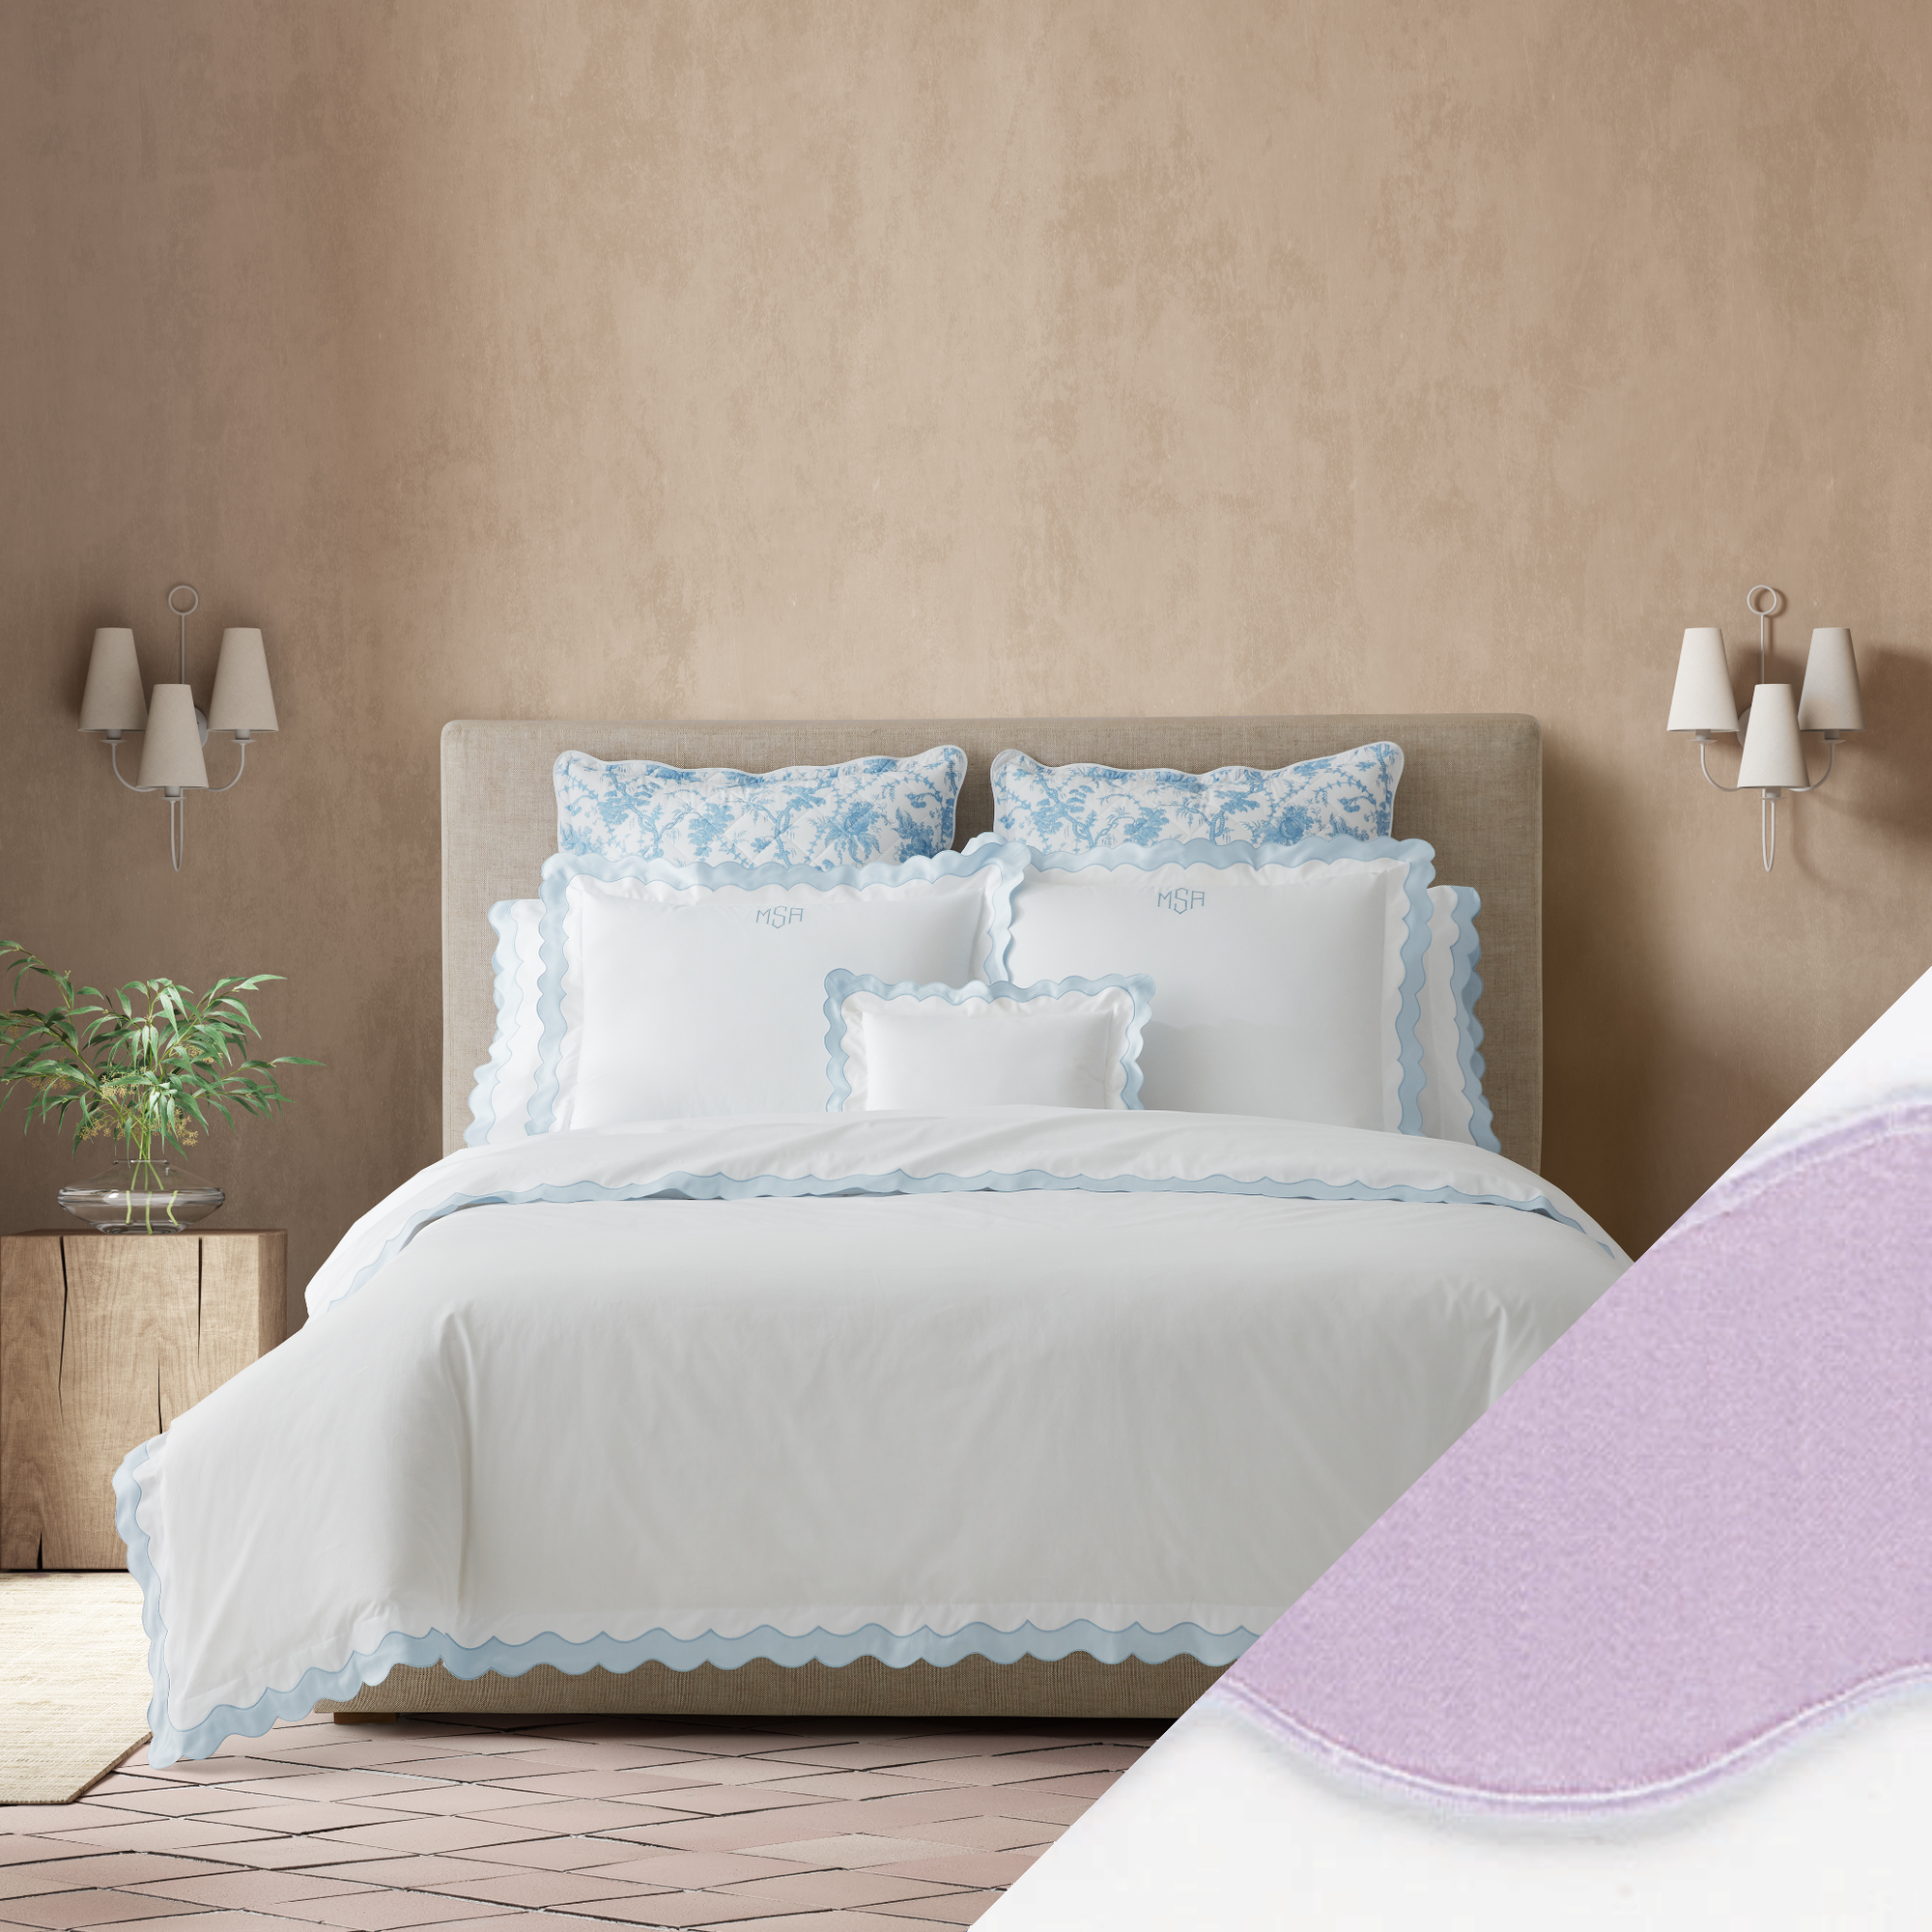 Full Bed Dressed in Matouk Lorelei Bedding in Blue Color with Violet Swatch